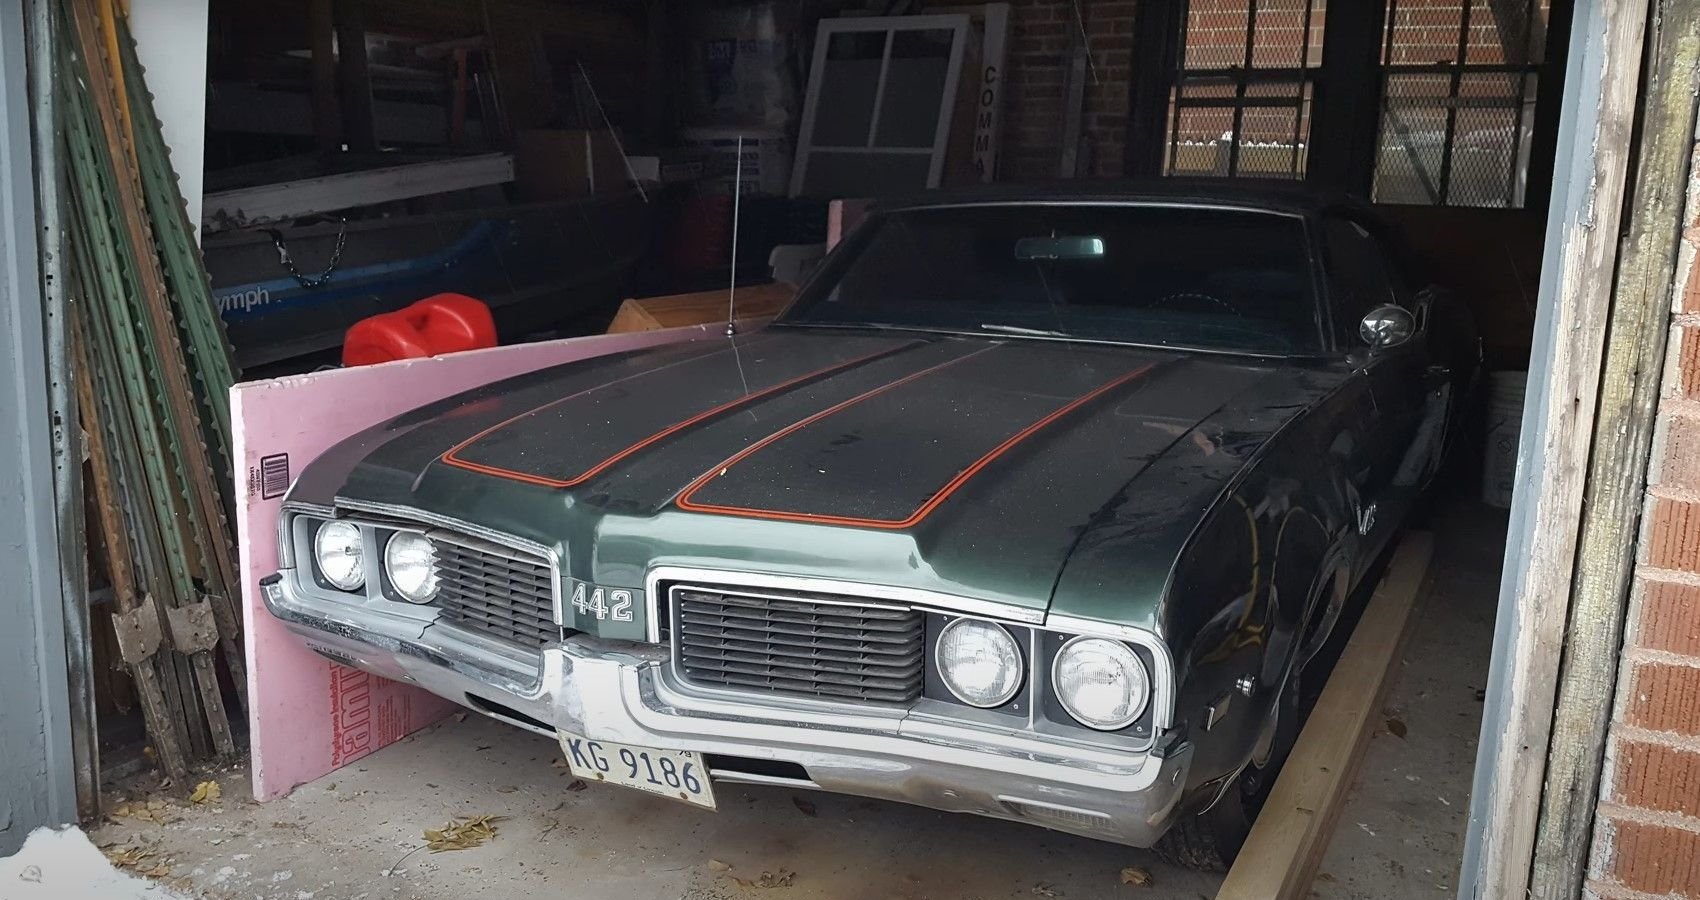 Nearly 45 Years In Storage Hasn't Diminished This 1969 Oldsmobile 442 Convertible's Allure